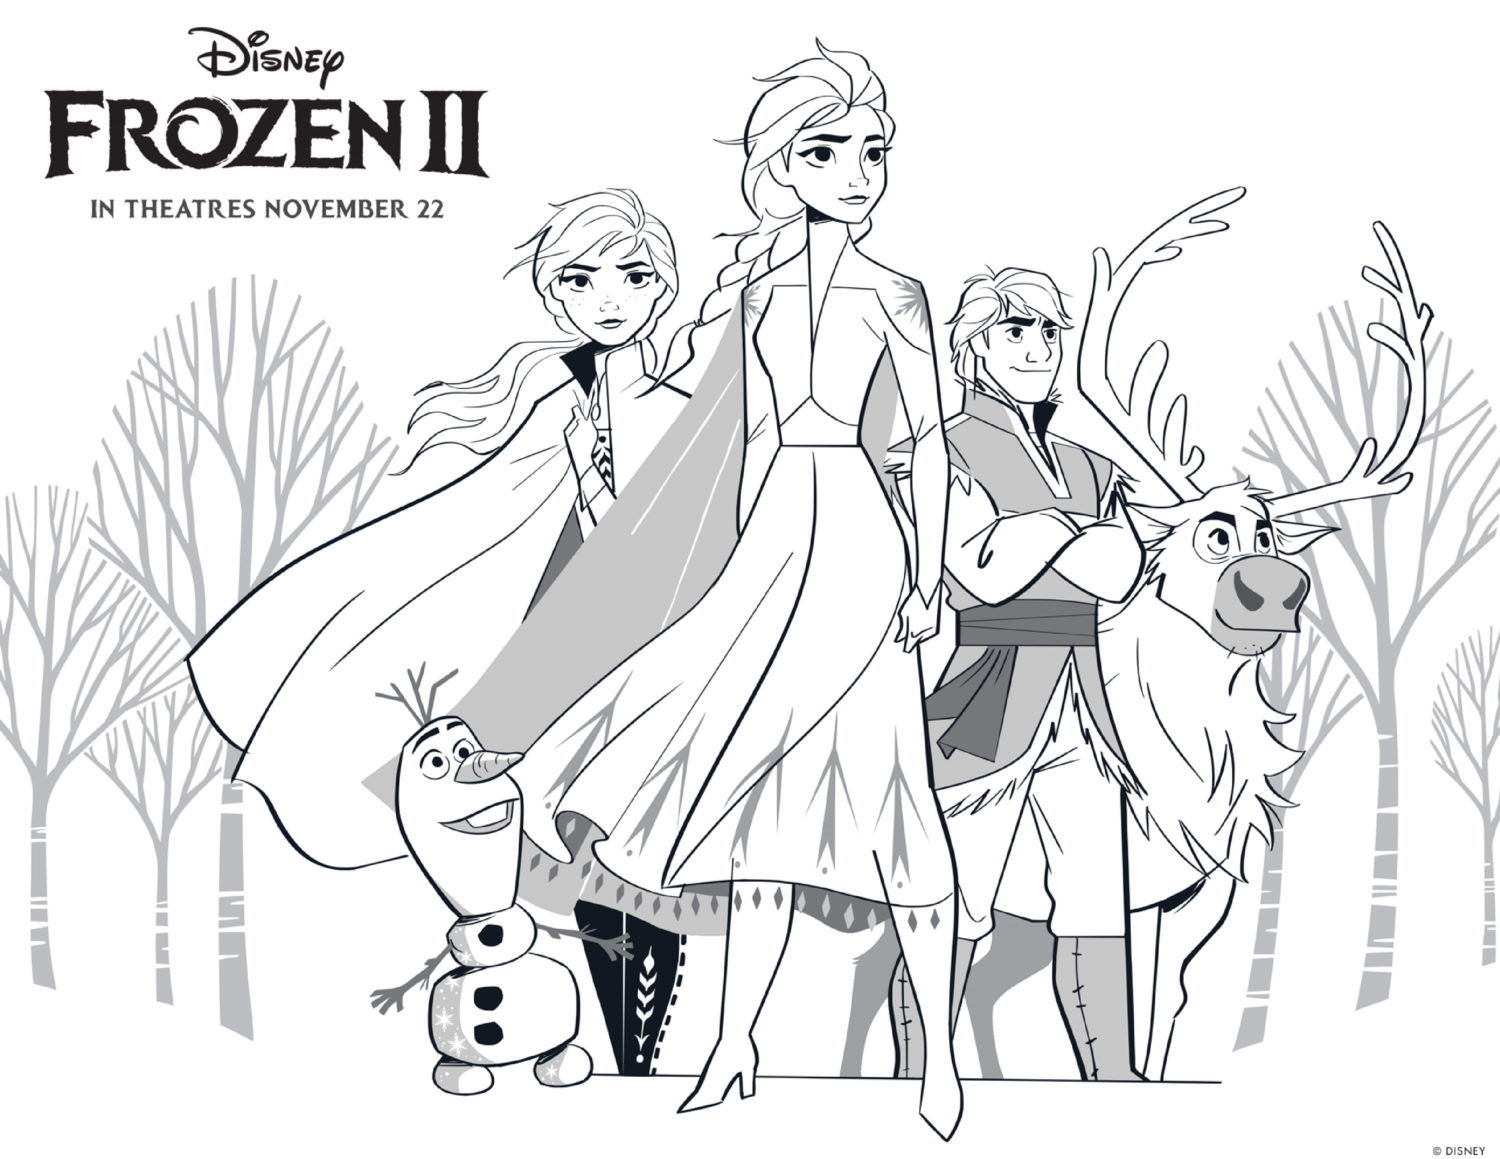 Frozen 2 Coloring Page